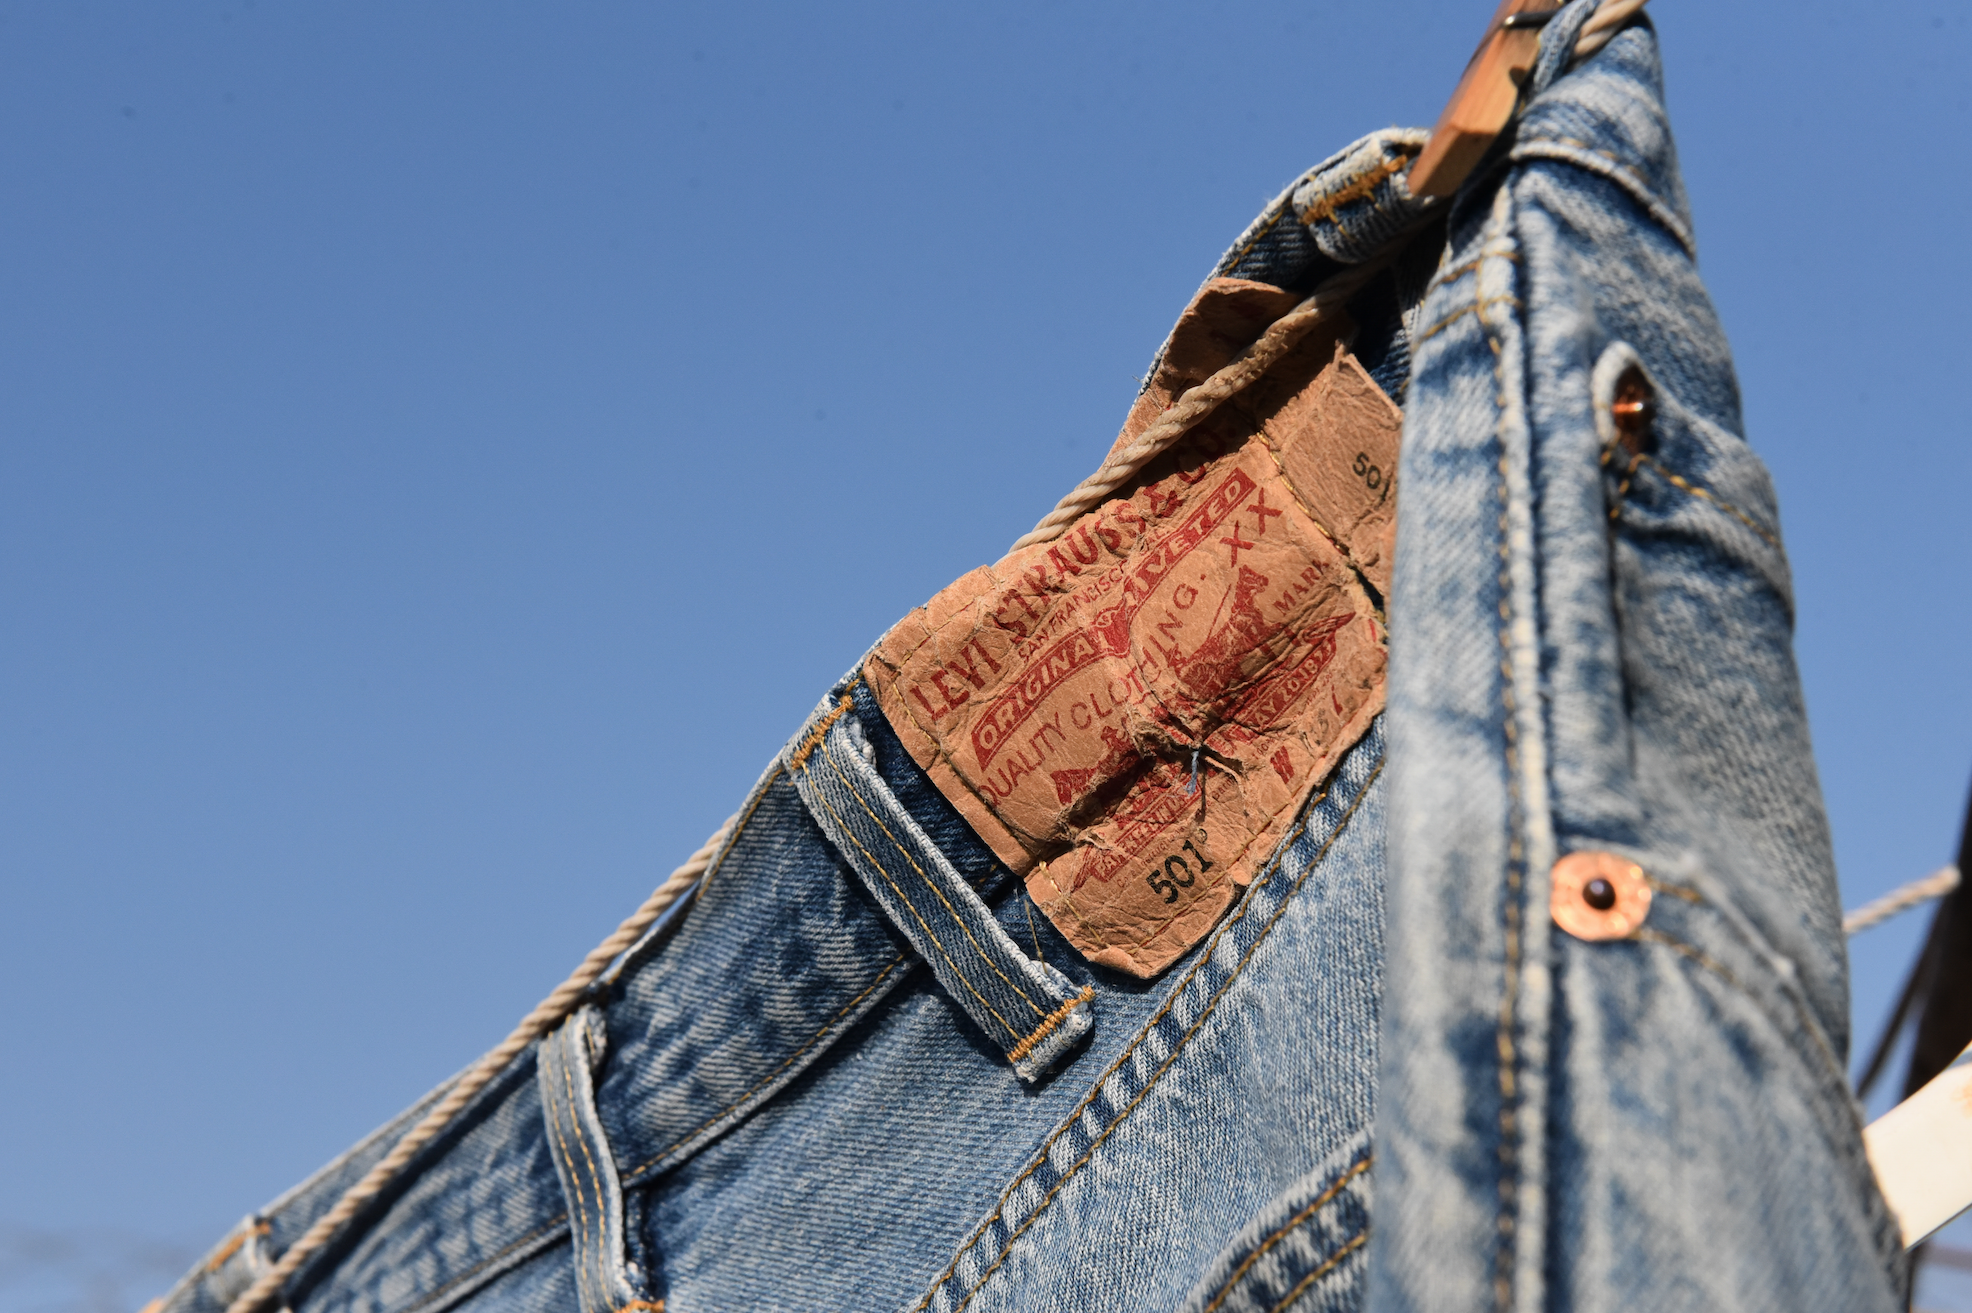 Trend Tuesday: Levi's Partners with Clothes to Good for Jeans Drive